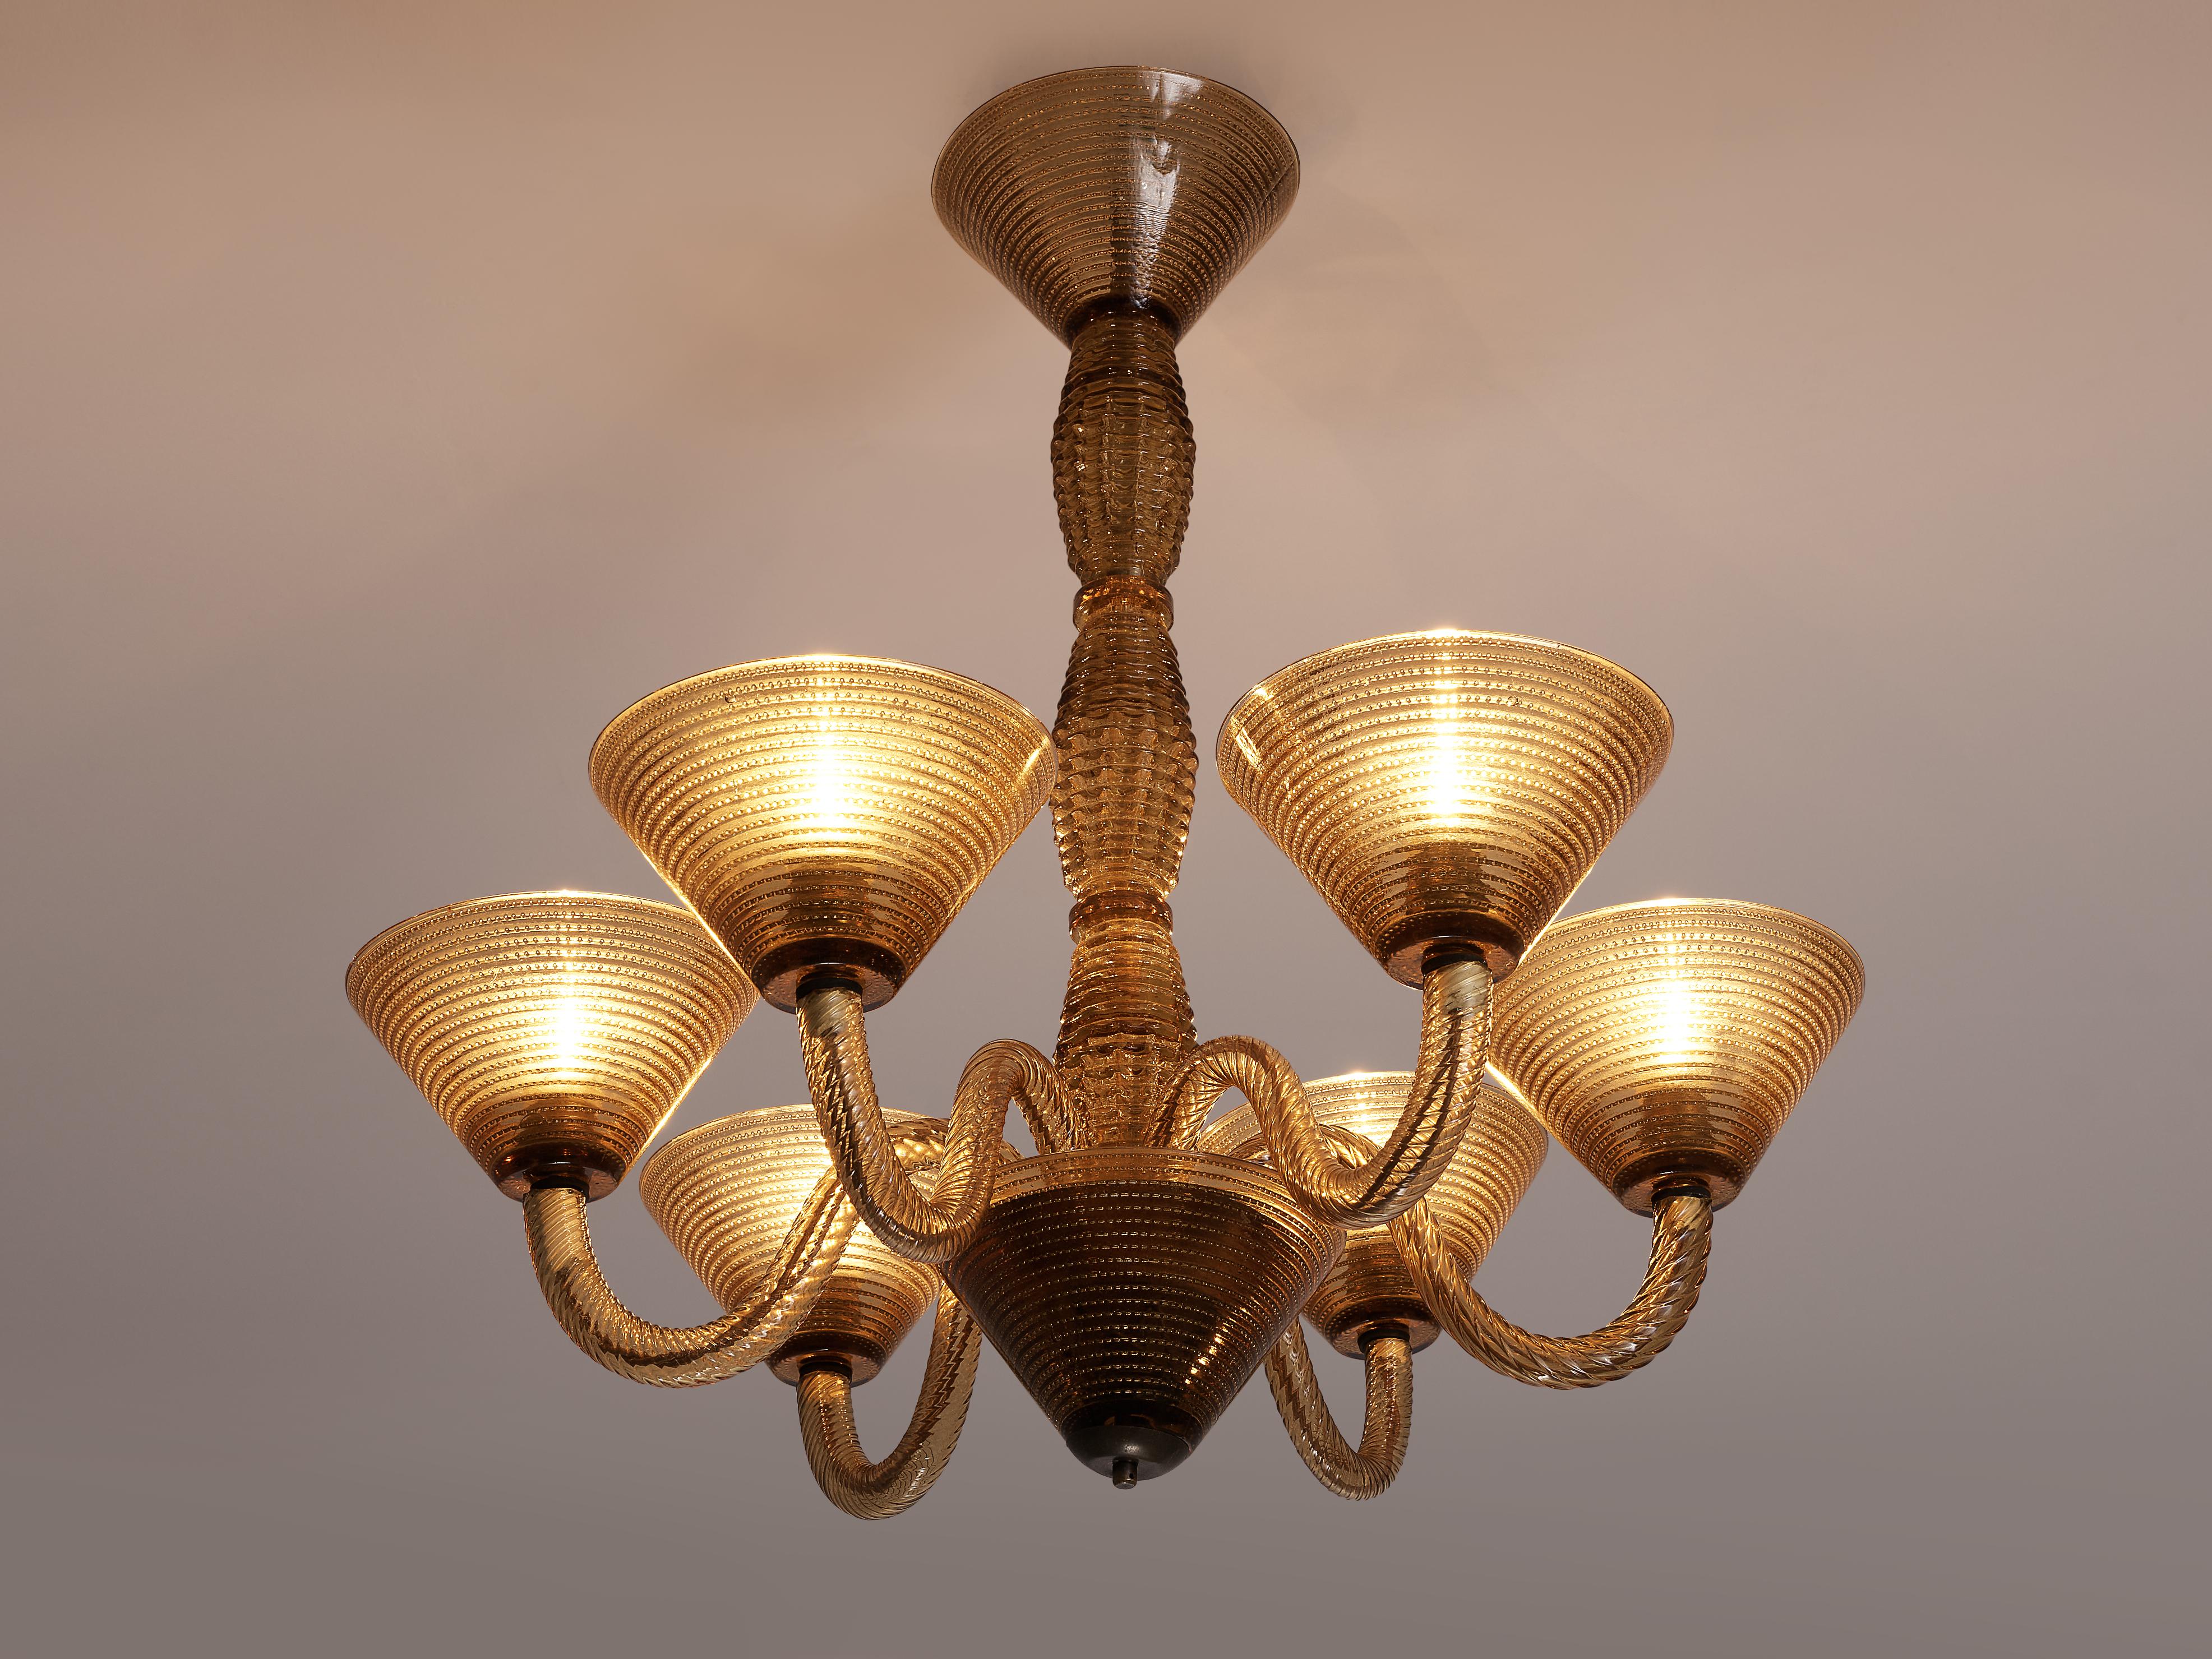 Chandelier with six arms, glass, metal, Italy, 1950s

This six-armed chandelier is made of soft brown colored glass. The glass features a structured surface with differently shaped lines. Six elegantly curved arms end in cone shaped shades that open